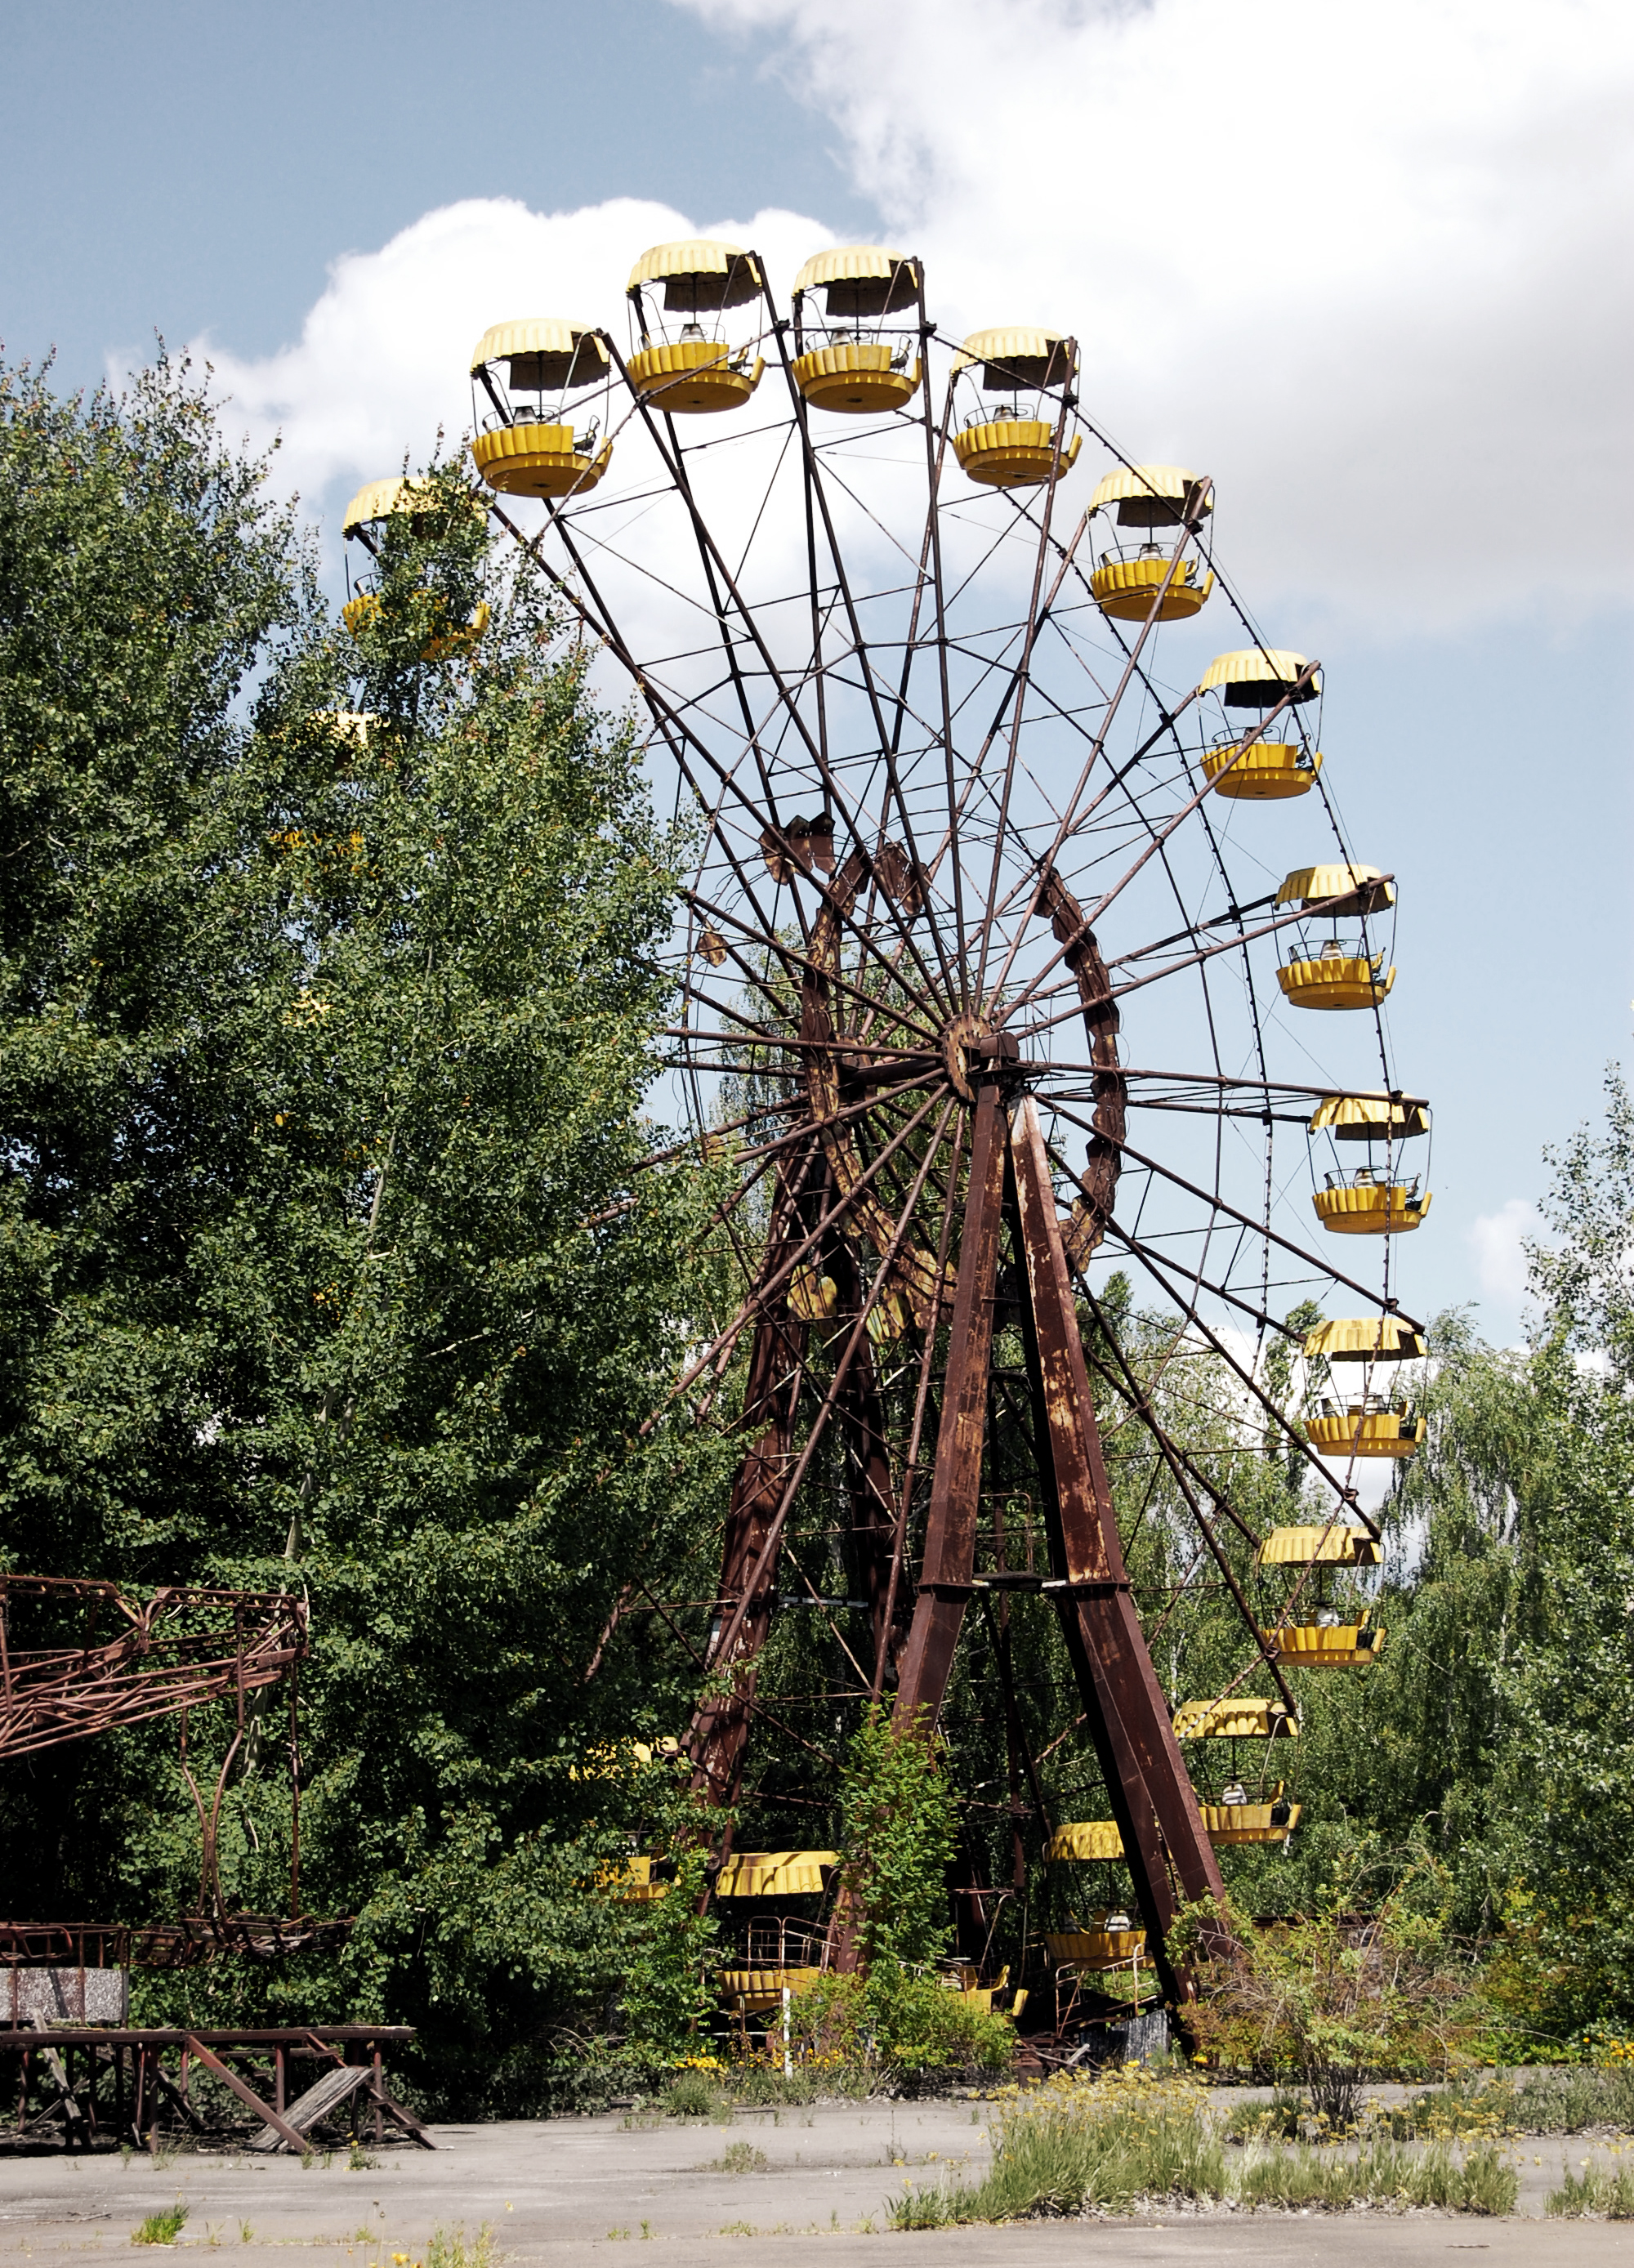 The most famous landmark of Chernobyl is this ferris wheel at the fairground.